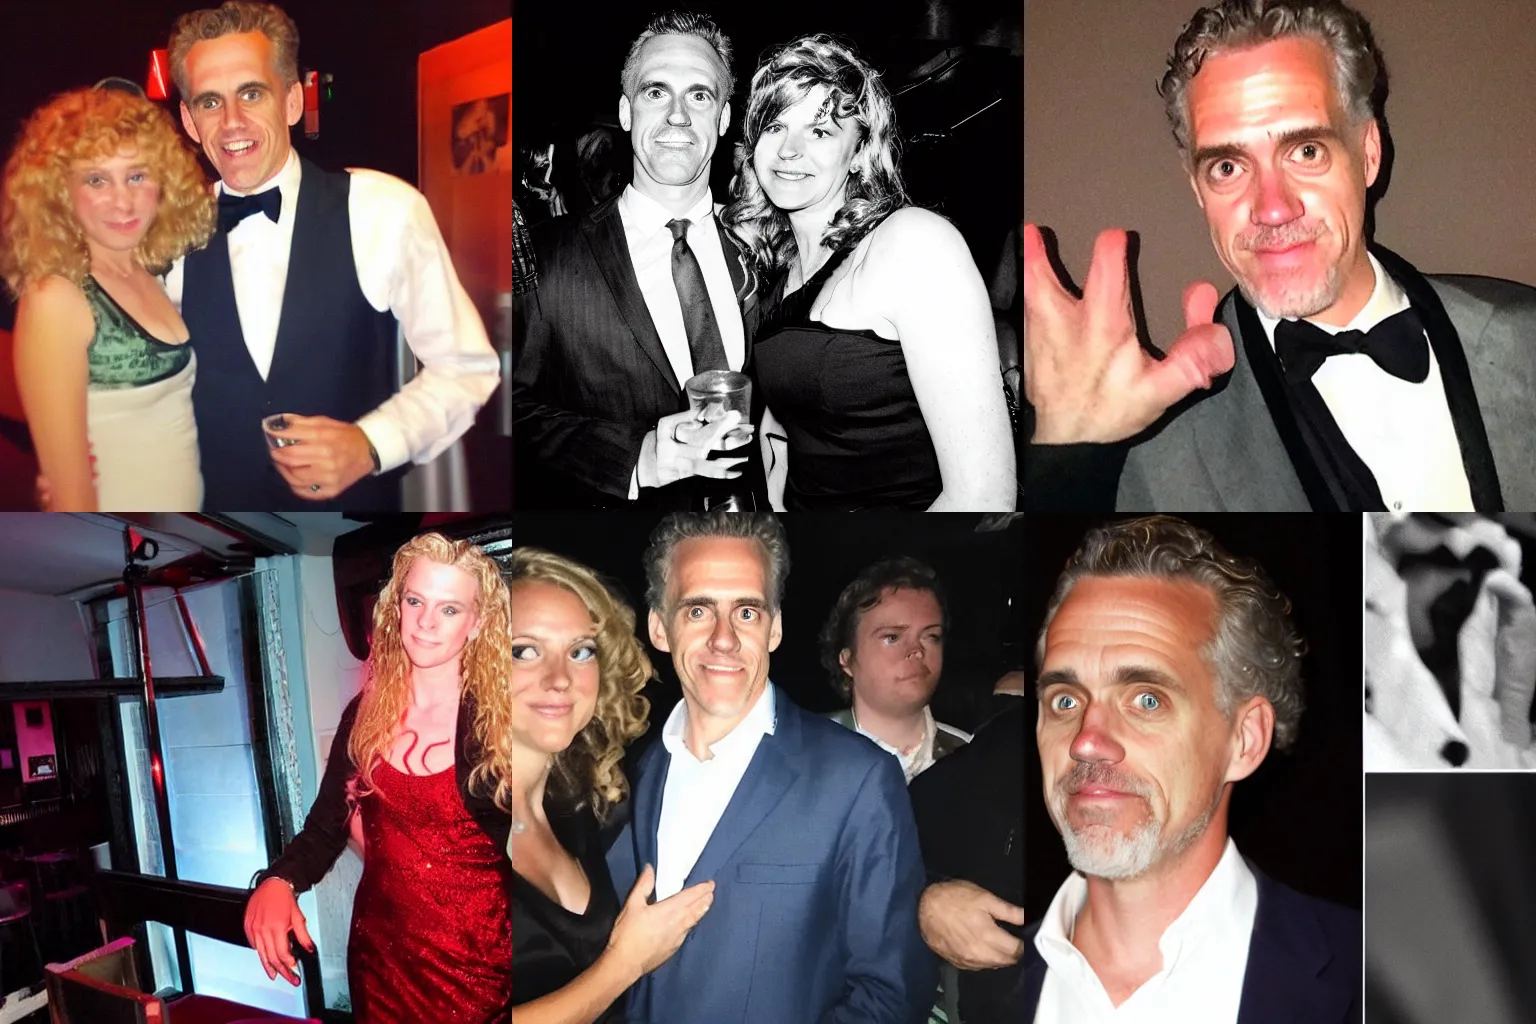 Prompt: Jordan Peterson at a night club dressed as a woman